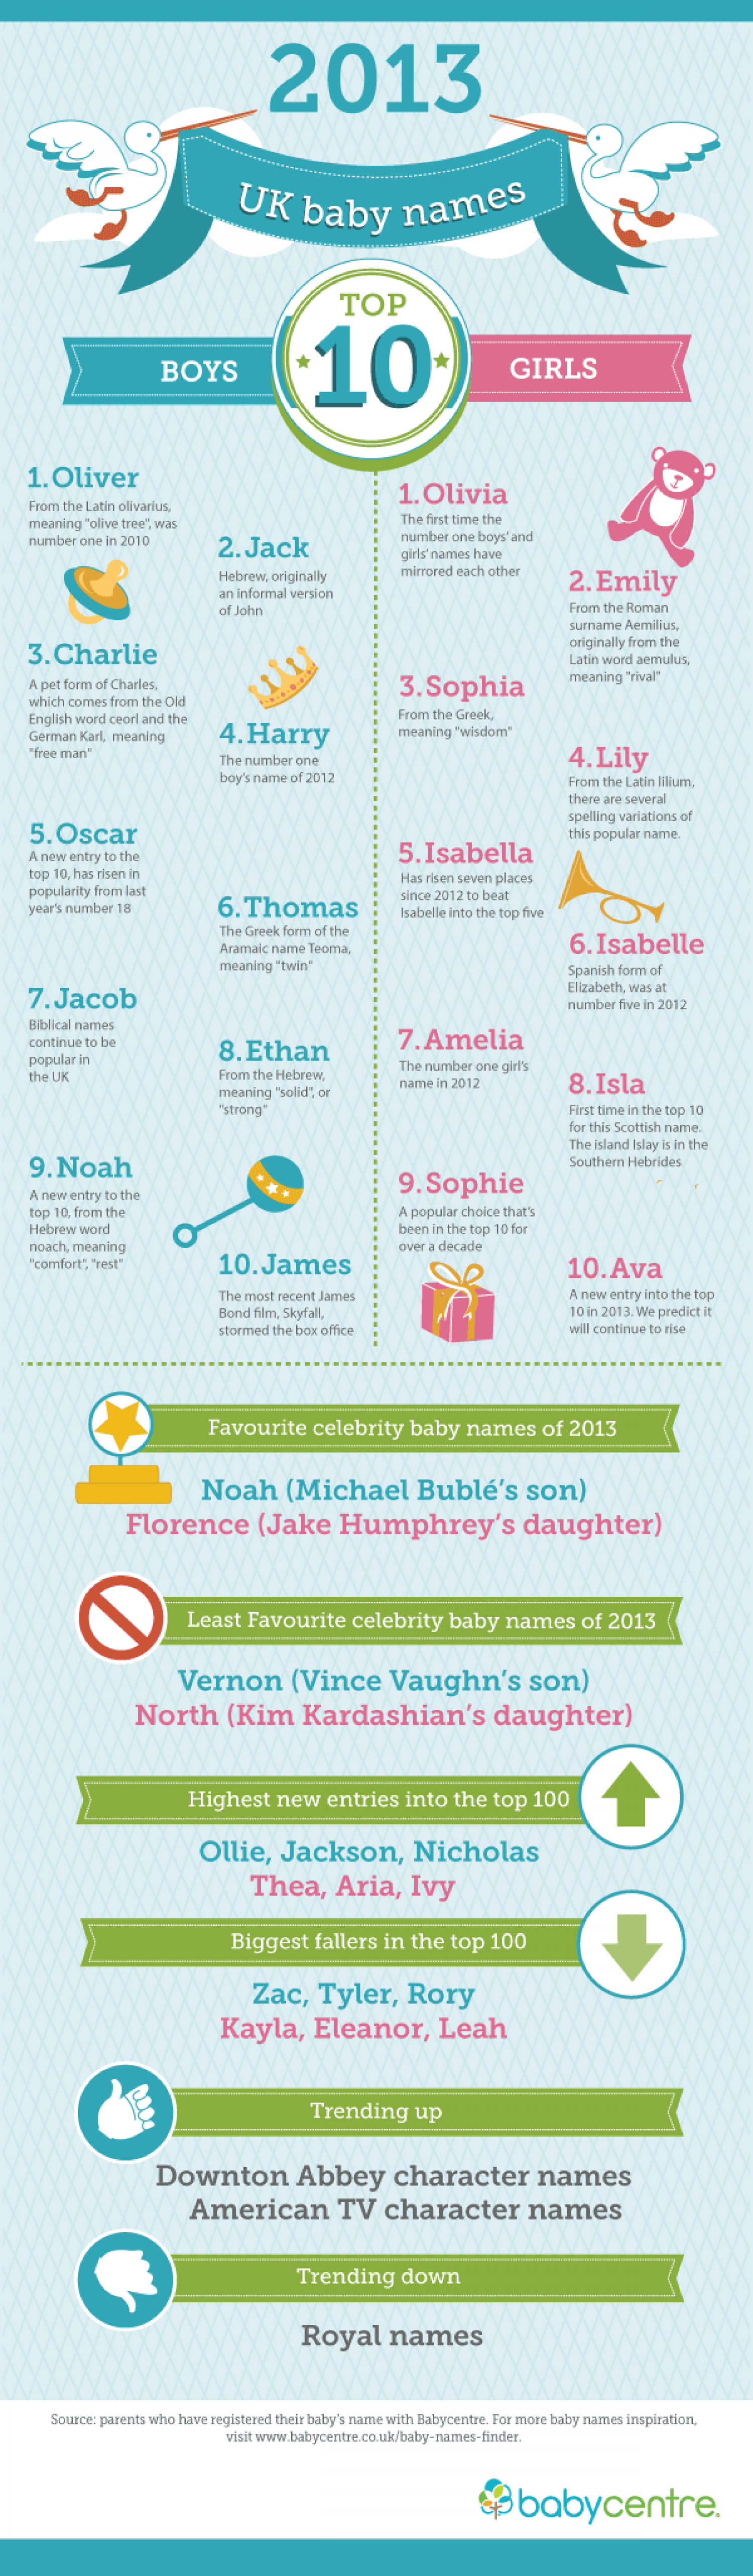 The top 10 Baby Names Infographic